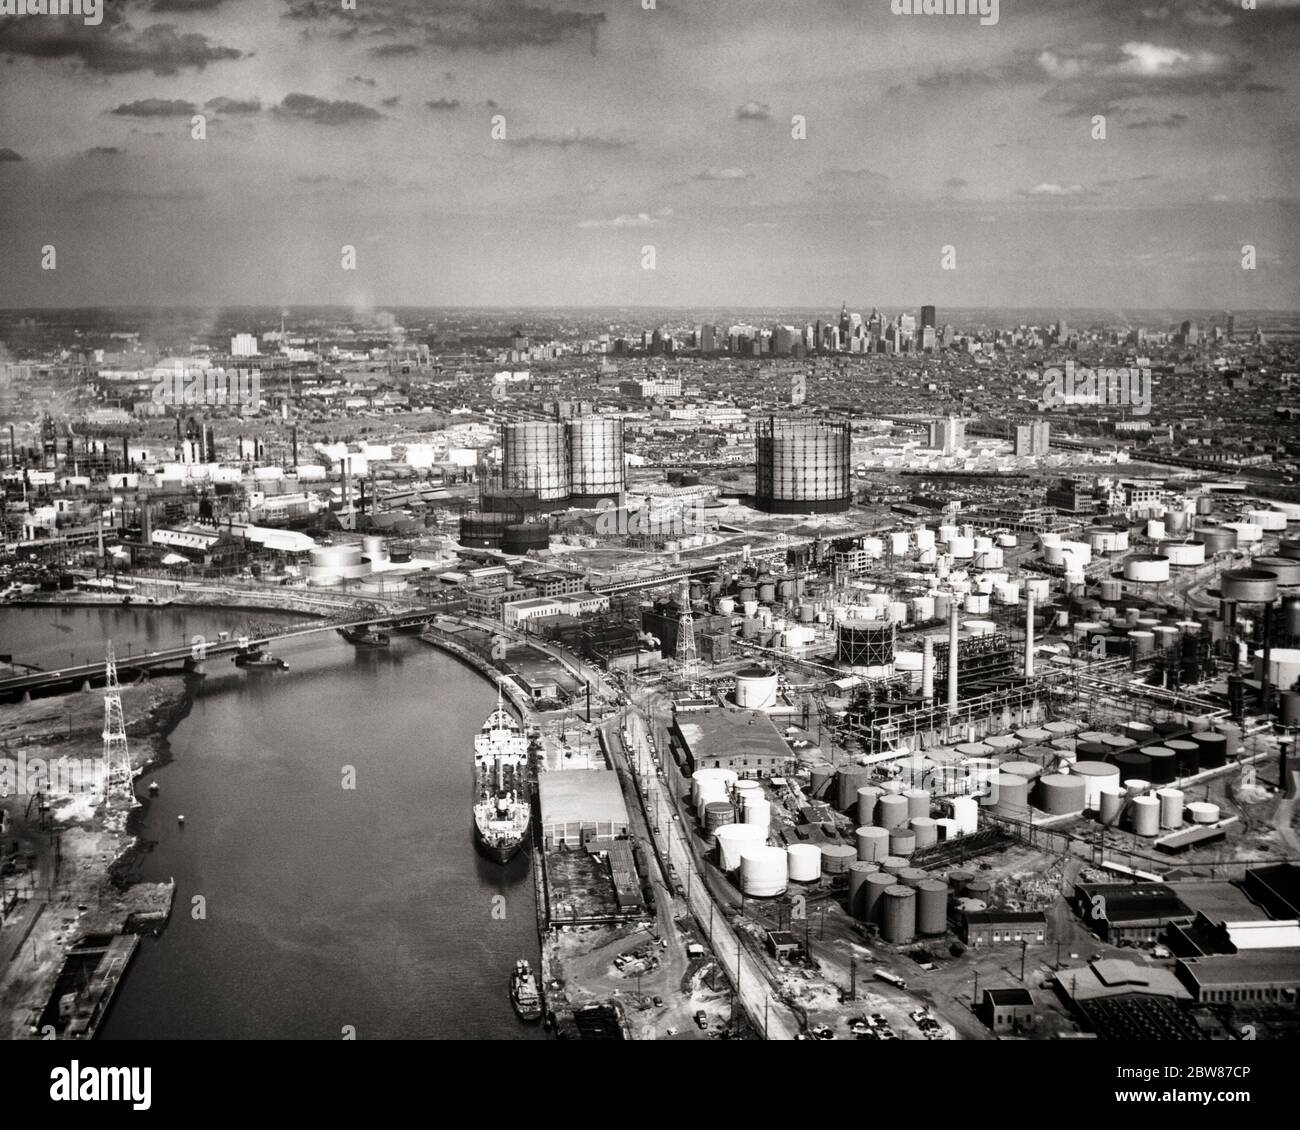 1950s SKYLINE AERIAL VIEW OF OIL REFINERIES ALONG SCHUYLKILL RIVER CENTER CITY PHILADELPHIA IN BACKGROUND PENNSYLVANIA USA - a868 HAR001 HARS OLD FASHIONED Stock Photo